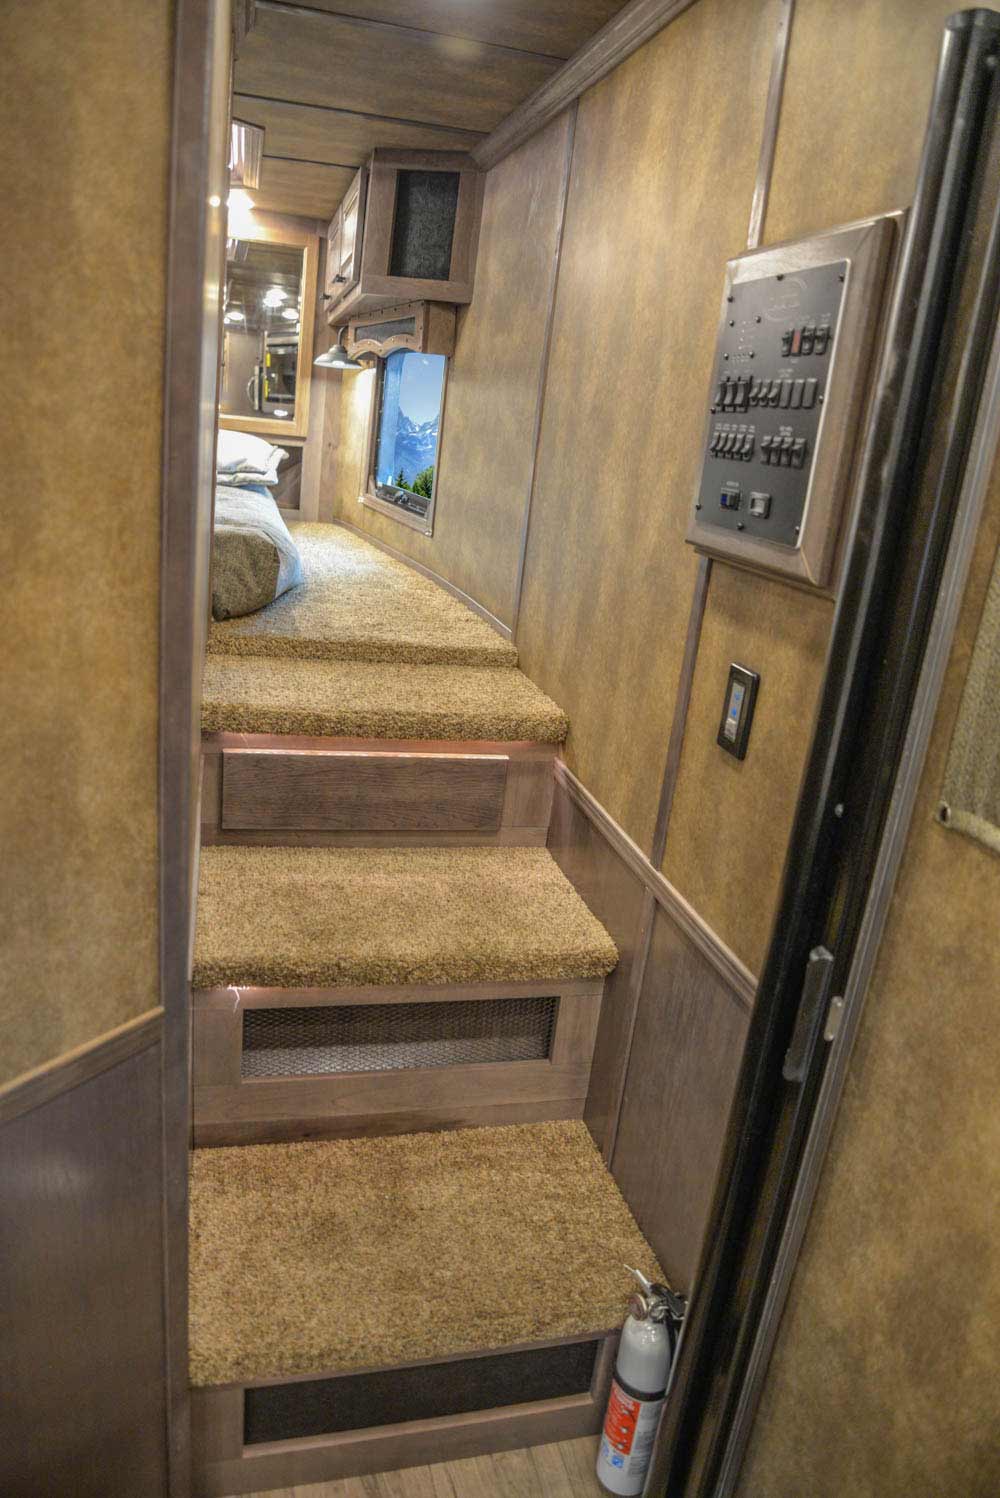 Steps to Bed in Gooseneck in BH8X23T2S Bighorn Edition Horse Trailer | Lakota Trailers